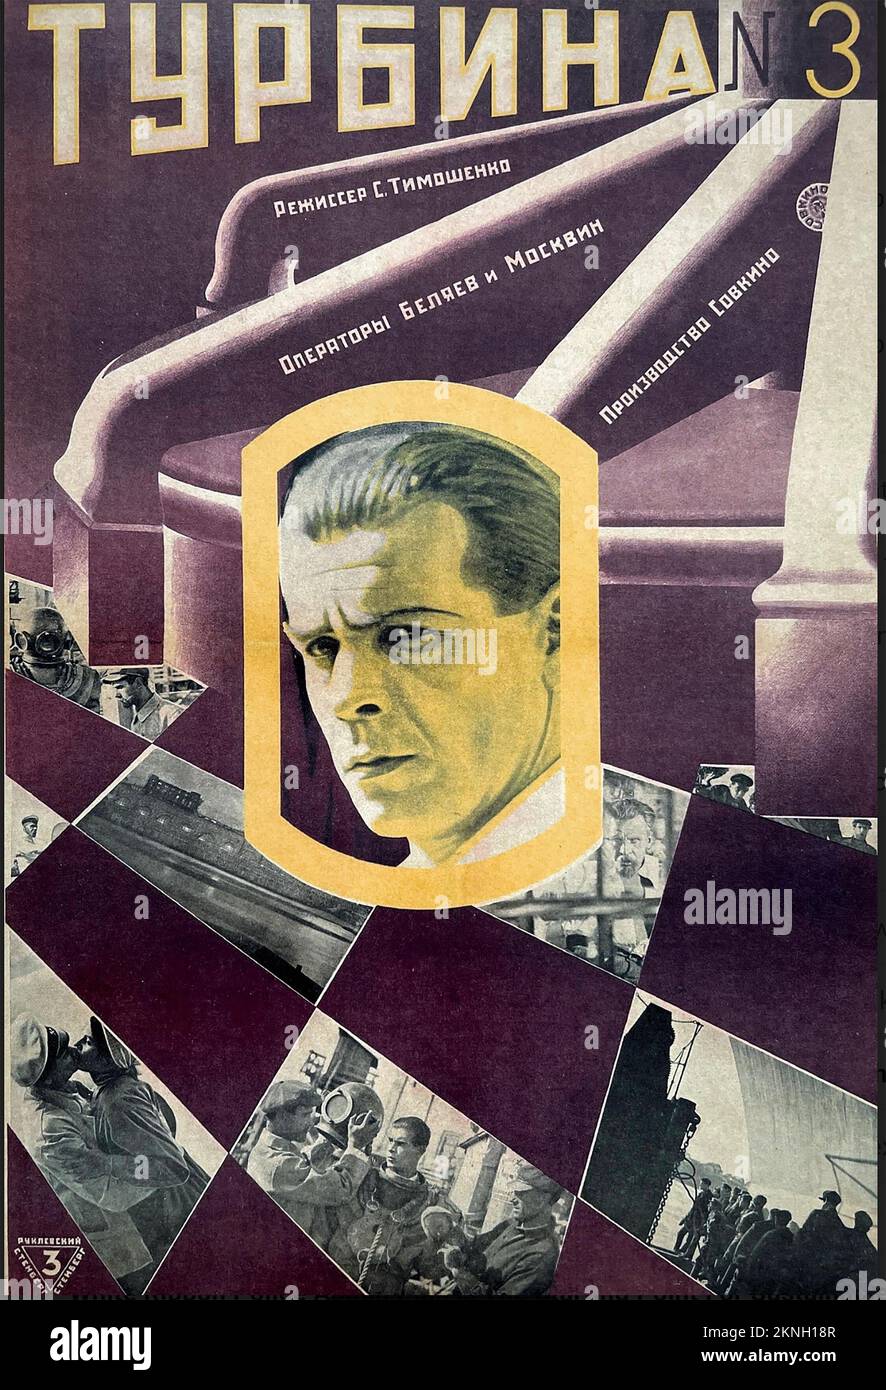 TURBINE NO 3. A poster for the 1927 Soviet film directed by Semyon Timoshenko about a crisis at a hydroelectric station. Stock Photo